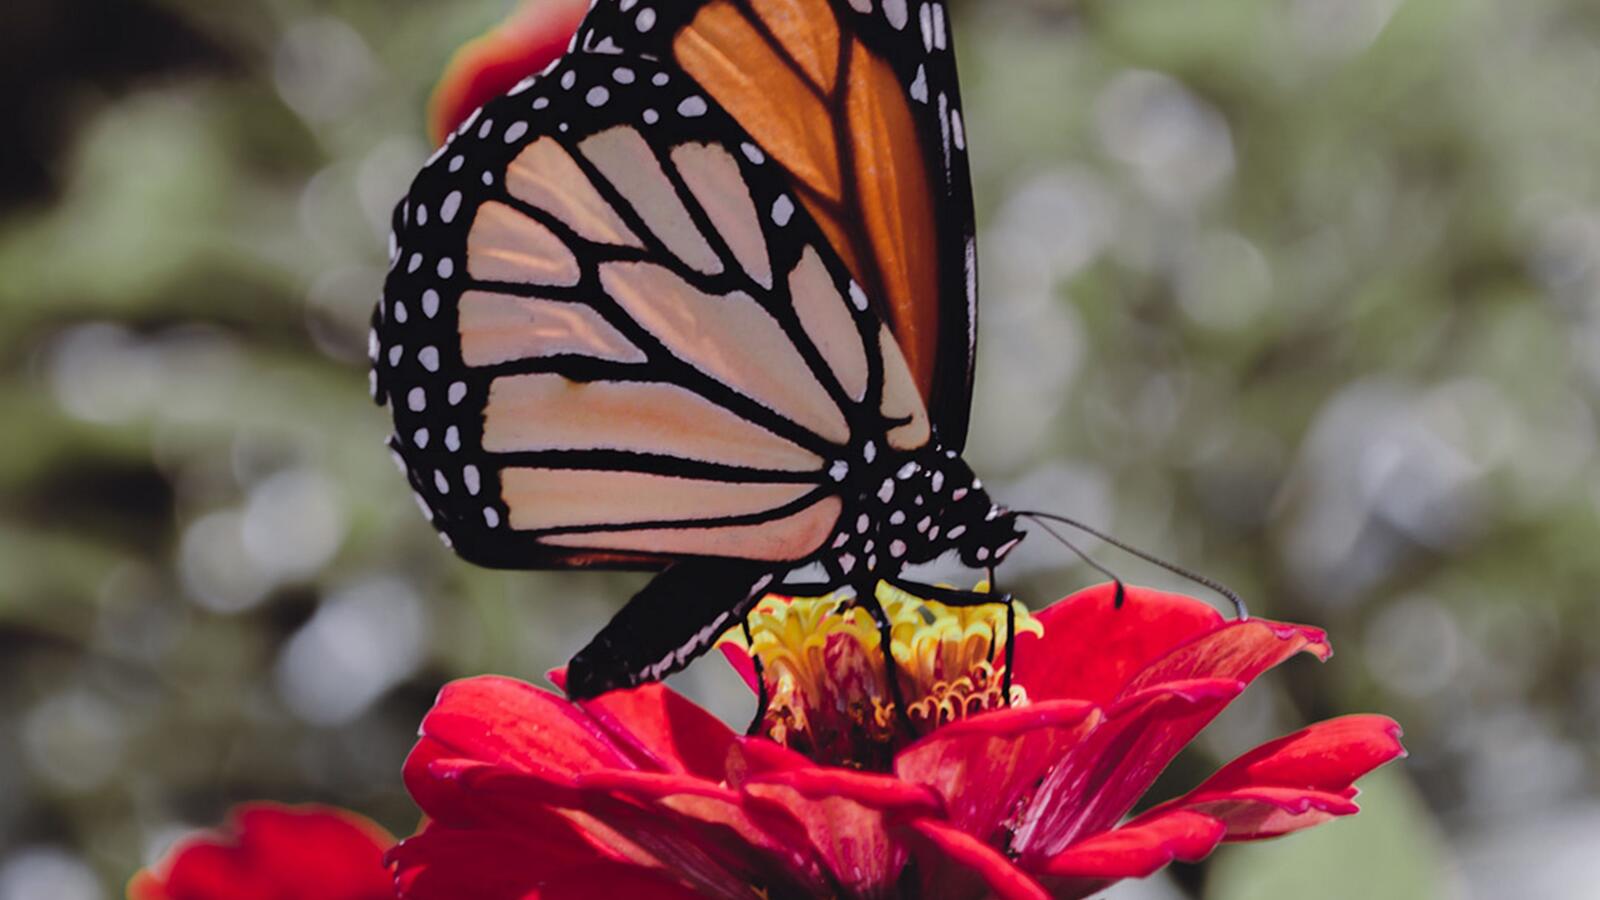 Free photo A butterfly eats nectar sitting on the petals of a flower